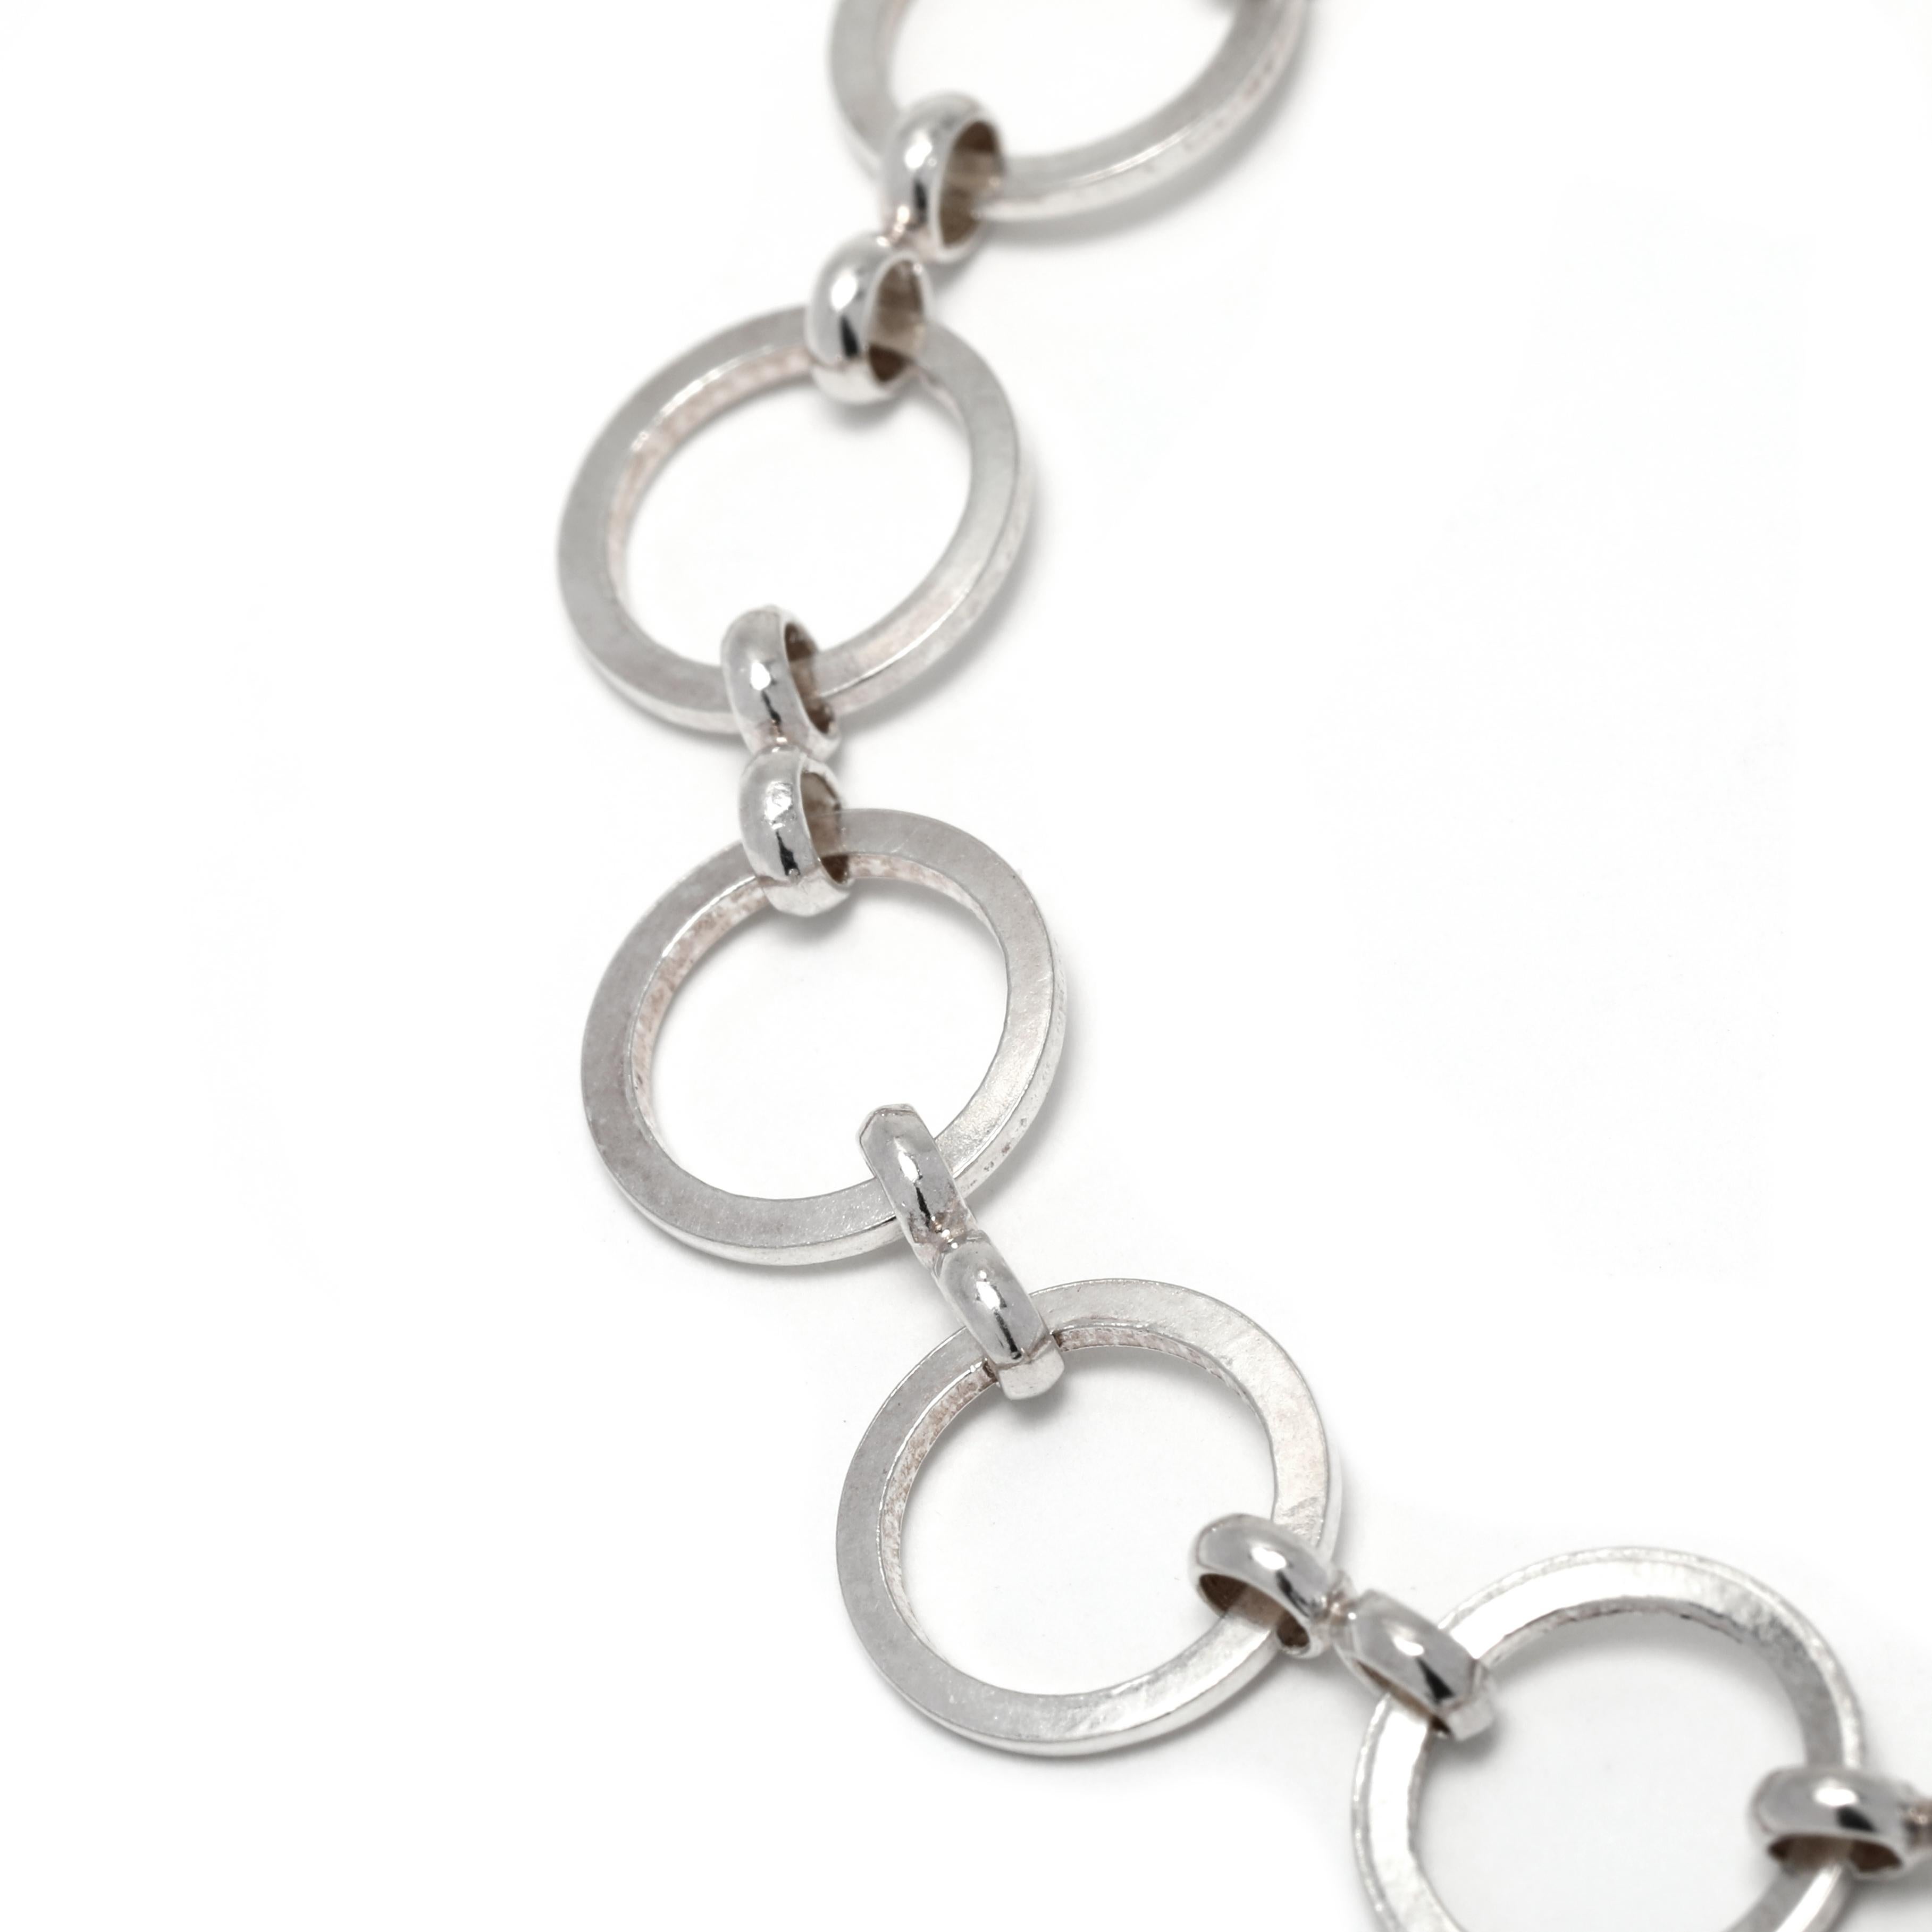 This stunning sterling silver bracelet will add a touch of elegance to any outfit. Featuring a classic flat round link design, this bracelet is crafted with high quality sterling silver and measures 7.25 inches in length. The elegant silver color is